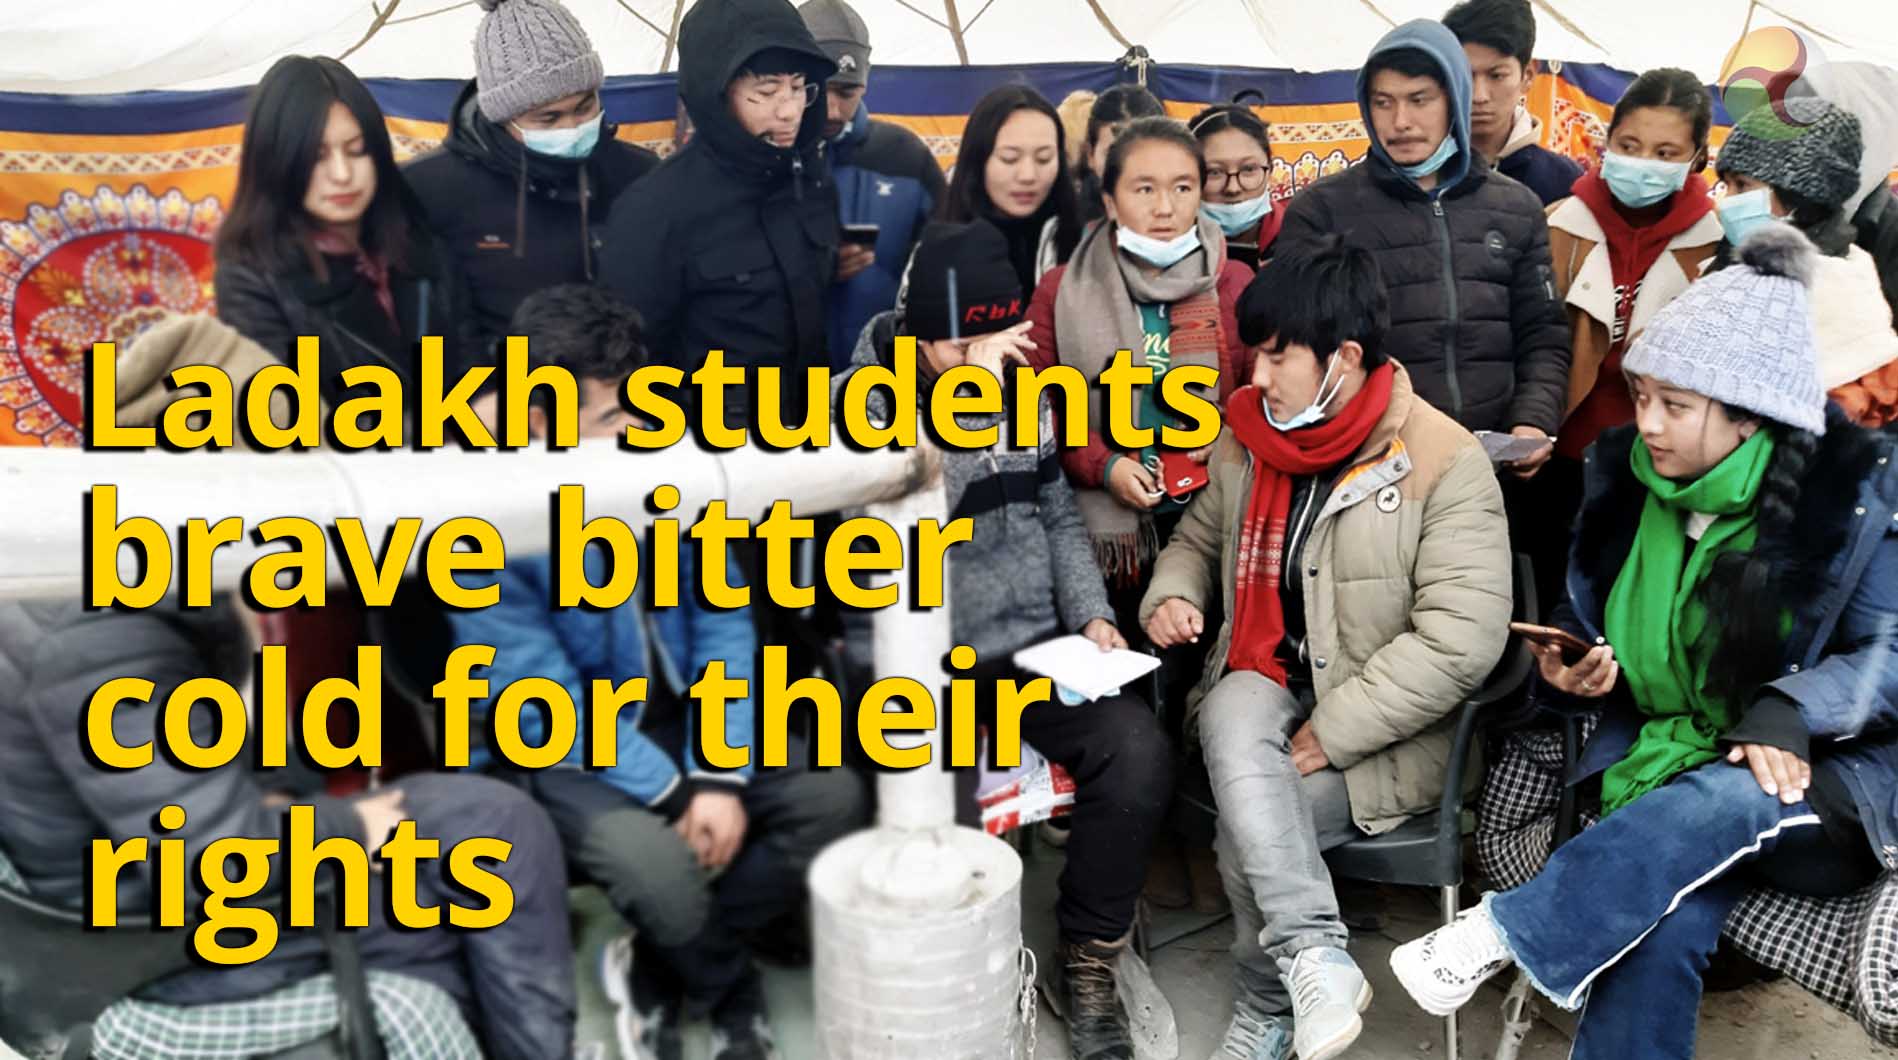 Ladakh students brave bitter cold for their rights